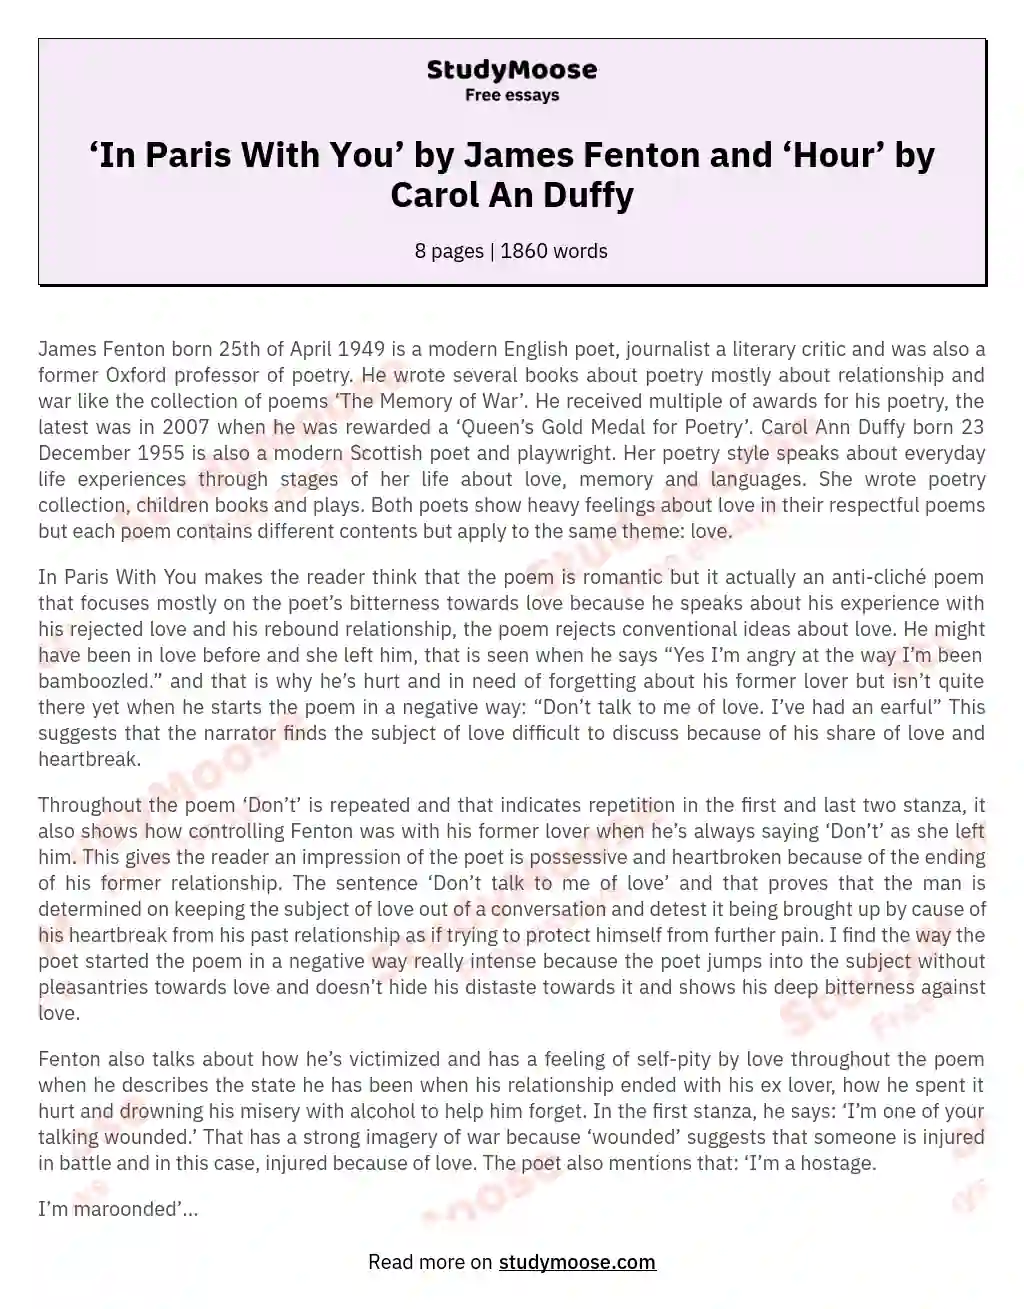 ‘In Paris With You’ by James Fenton and ‘Hour’ by Carol An Duffy